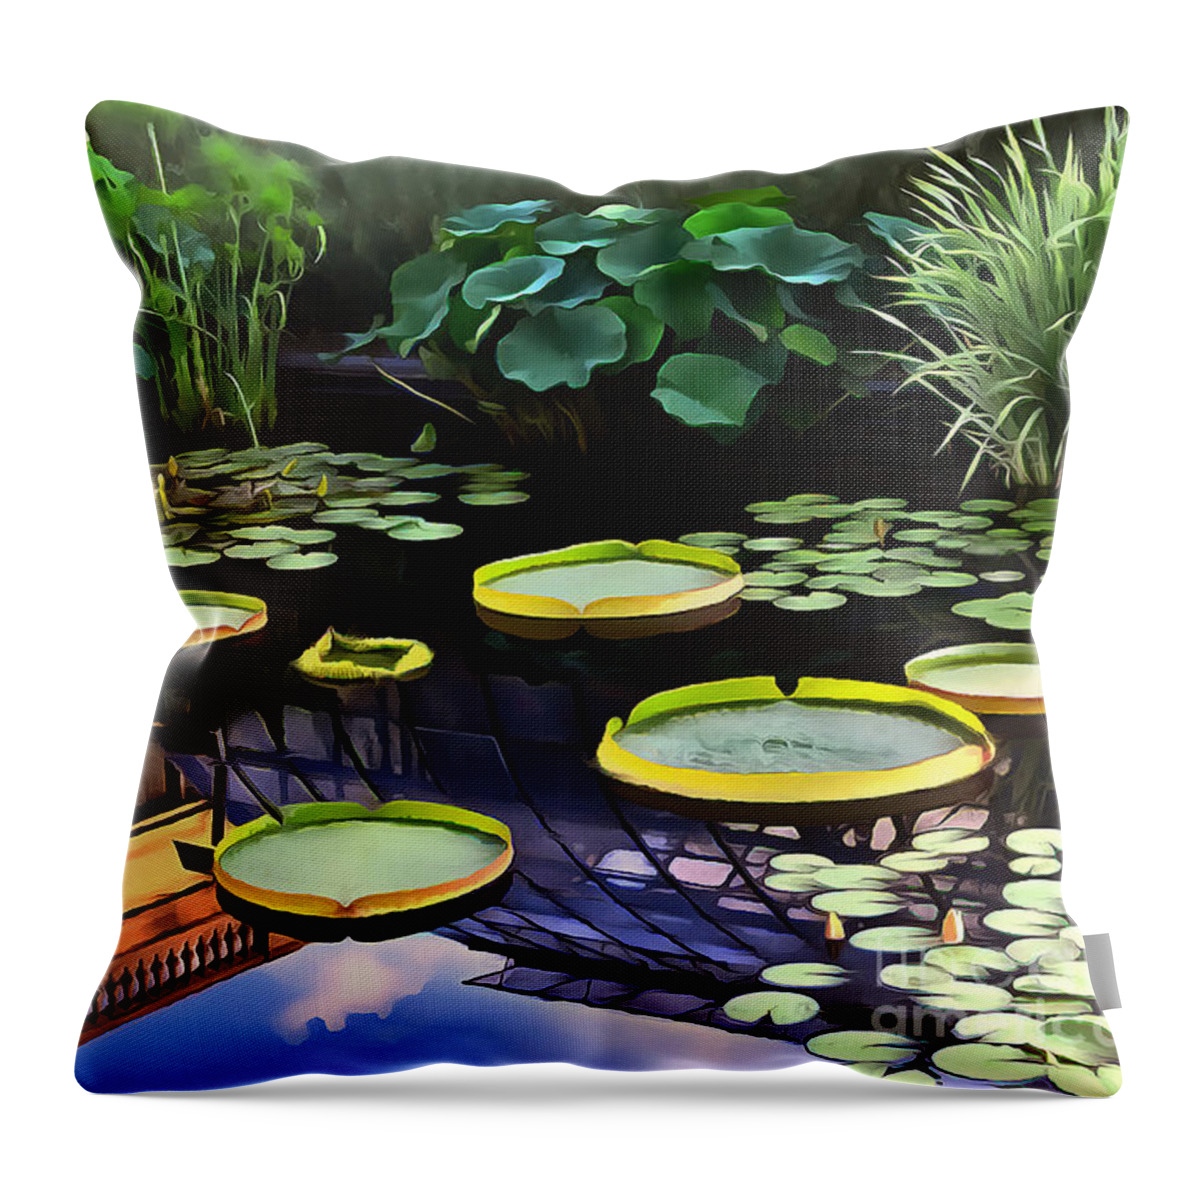 Lily Pads Throw Pillow featuring the photograph Lily Pond with Reflection by Sea Change Vibes